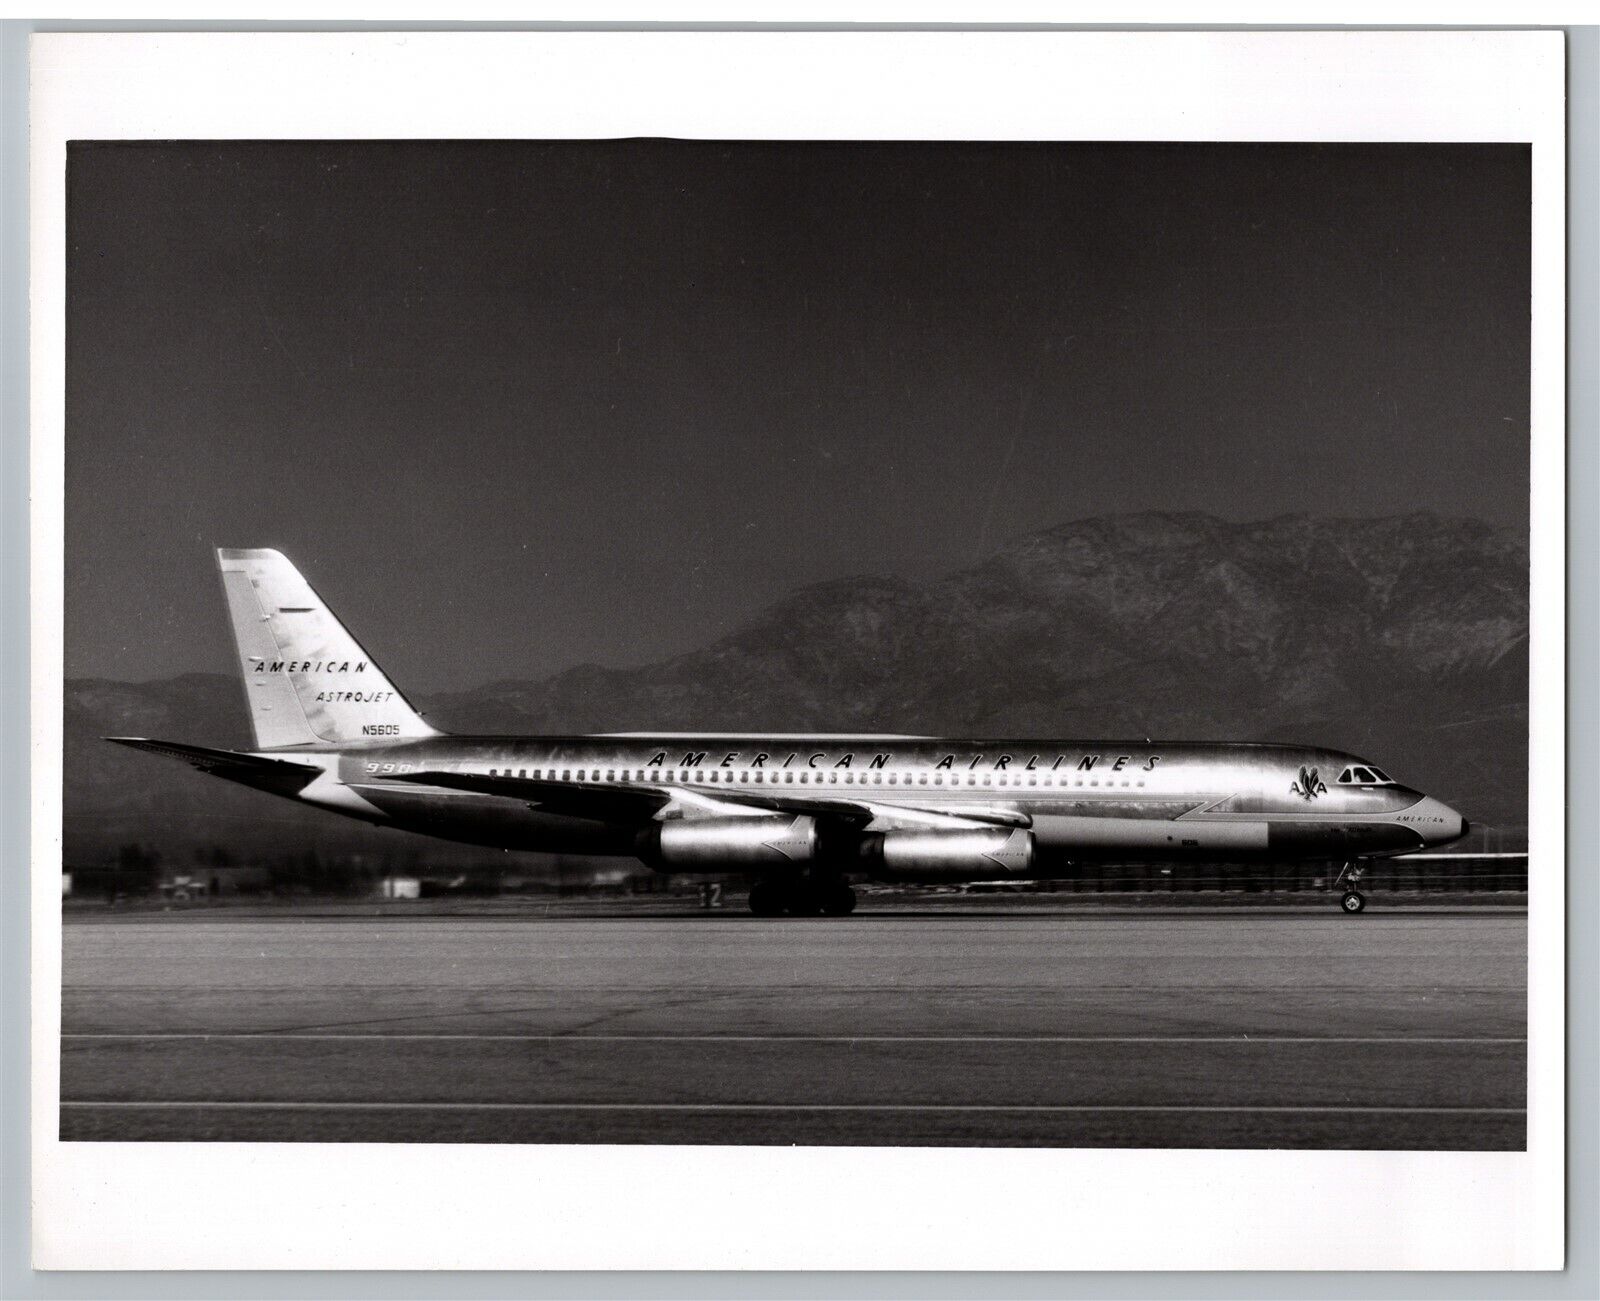 American Airlines 990 Astrojet Issued Aviation Airplane 1960s B&W Photo #3 C1